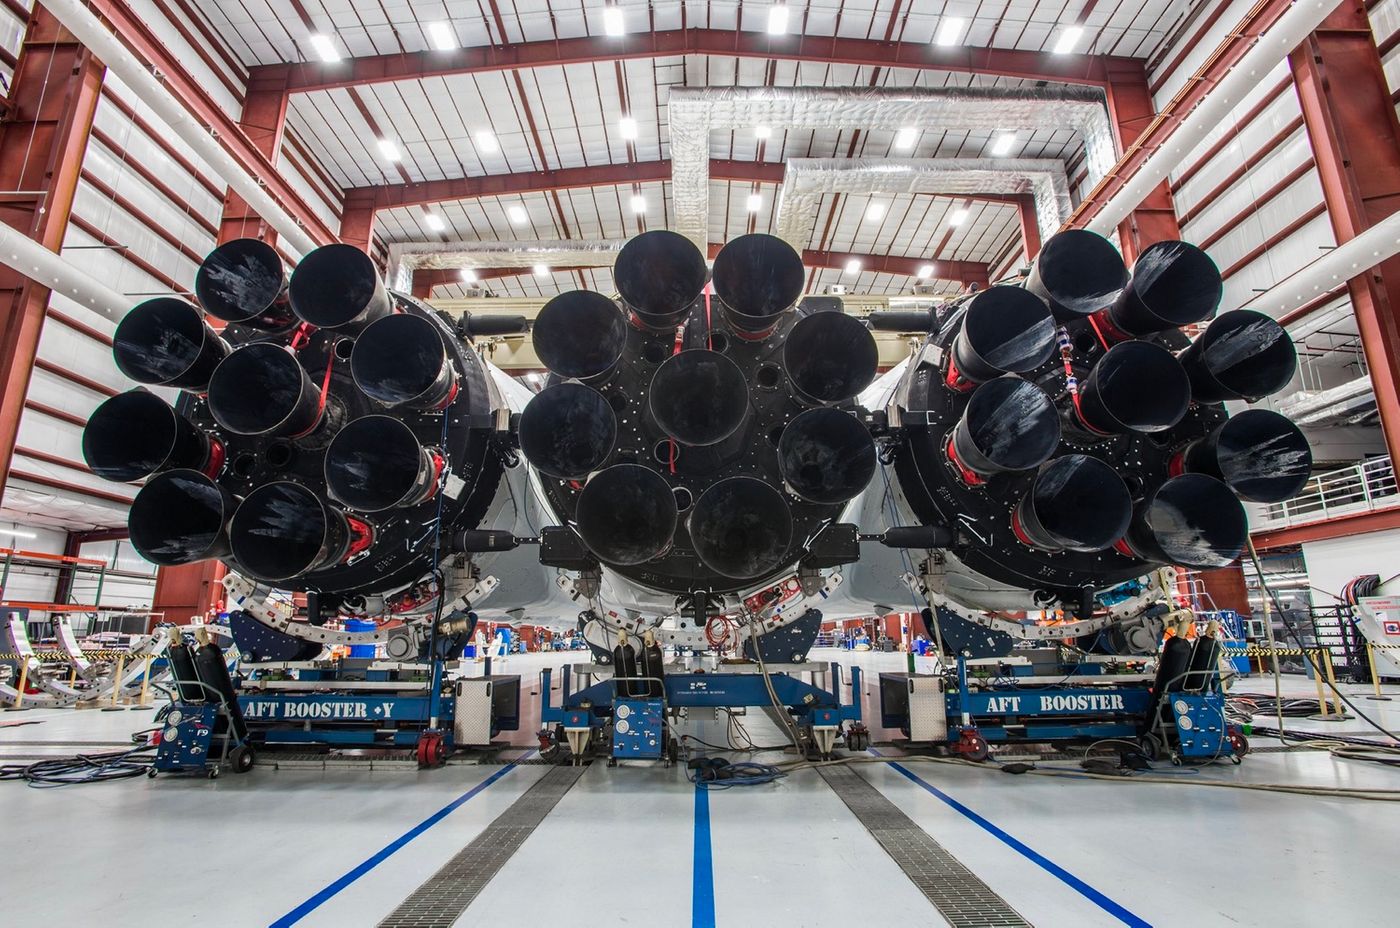 A look at the monstrously-large engines behind Falcon Heavy.